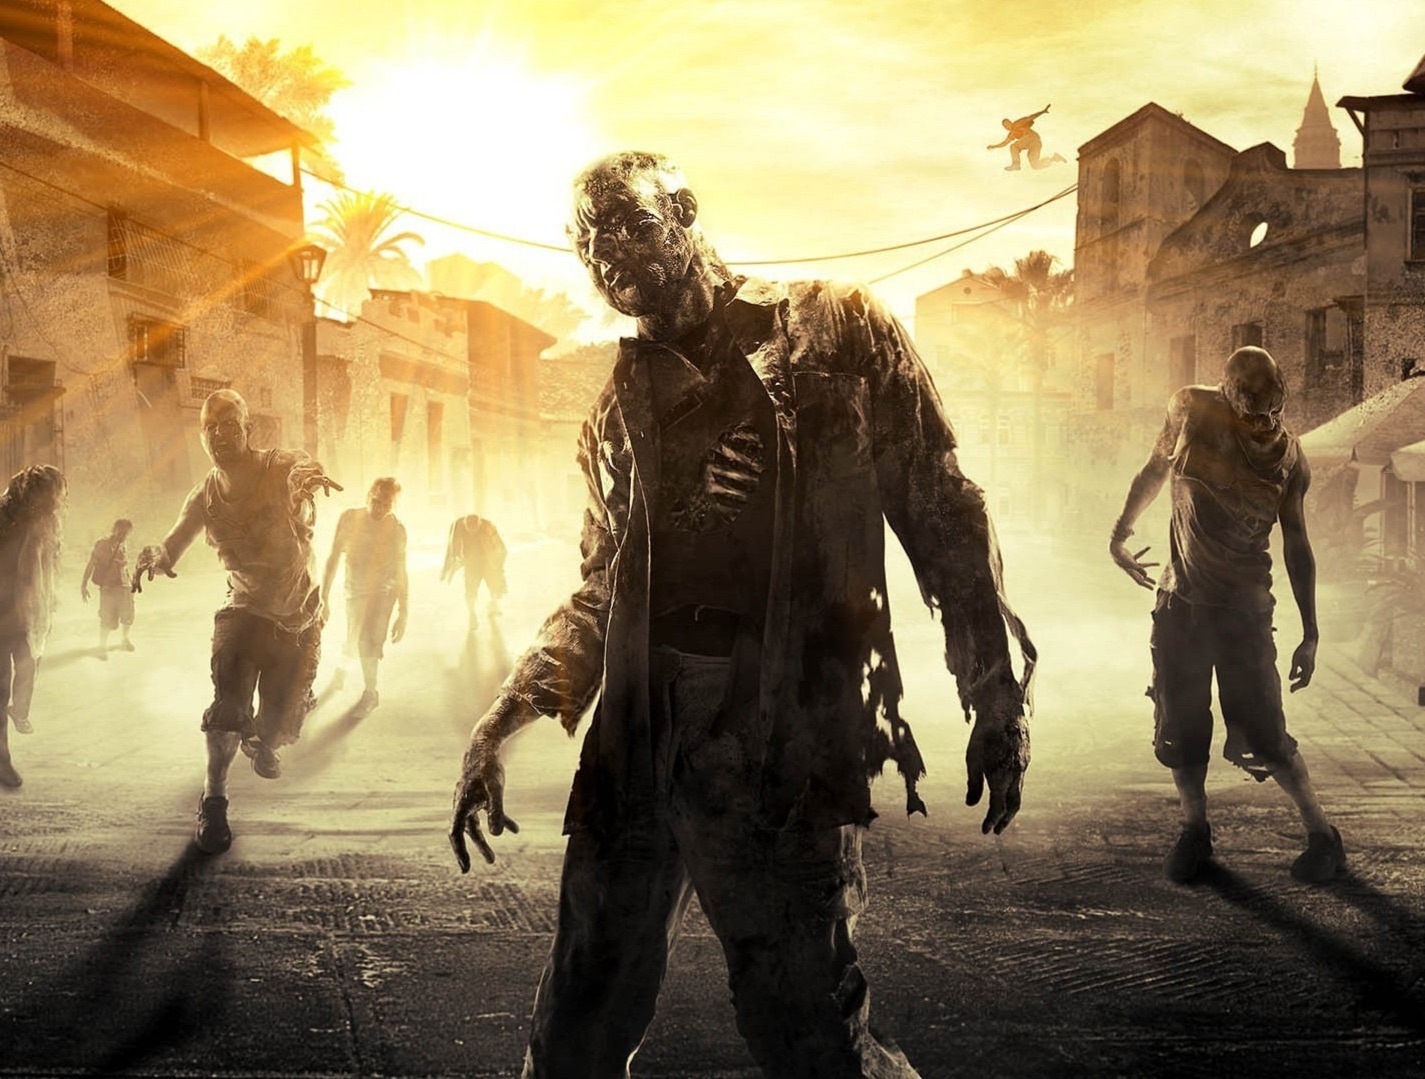 dying light hellraid wiki